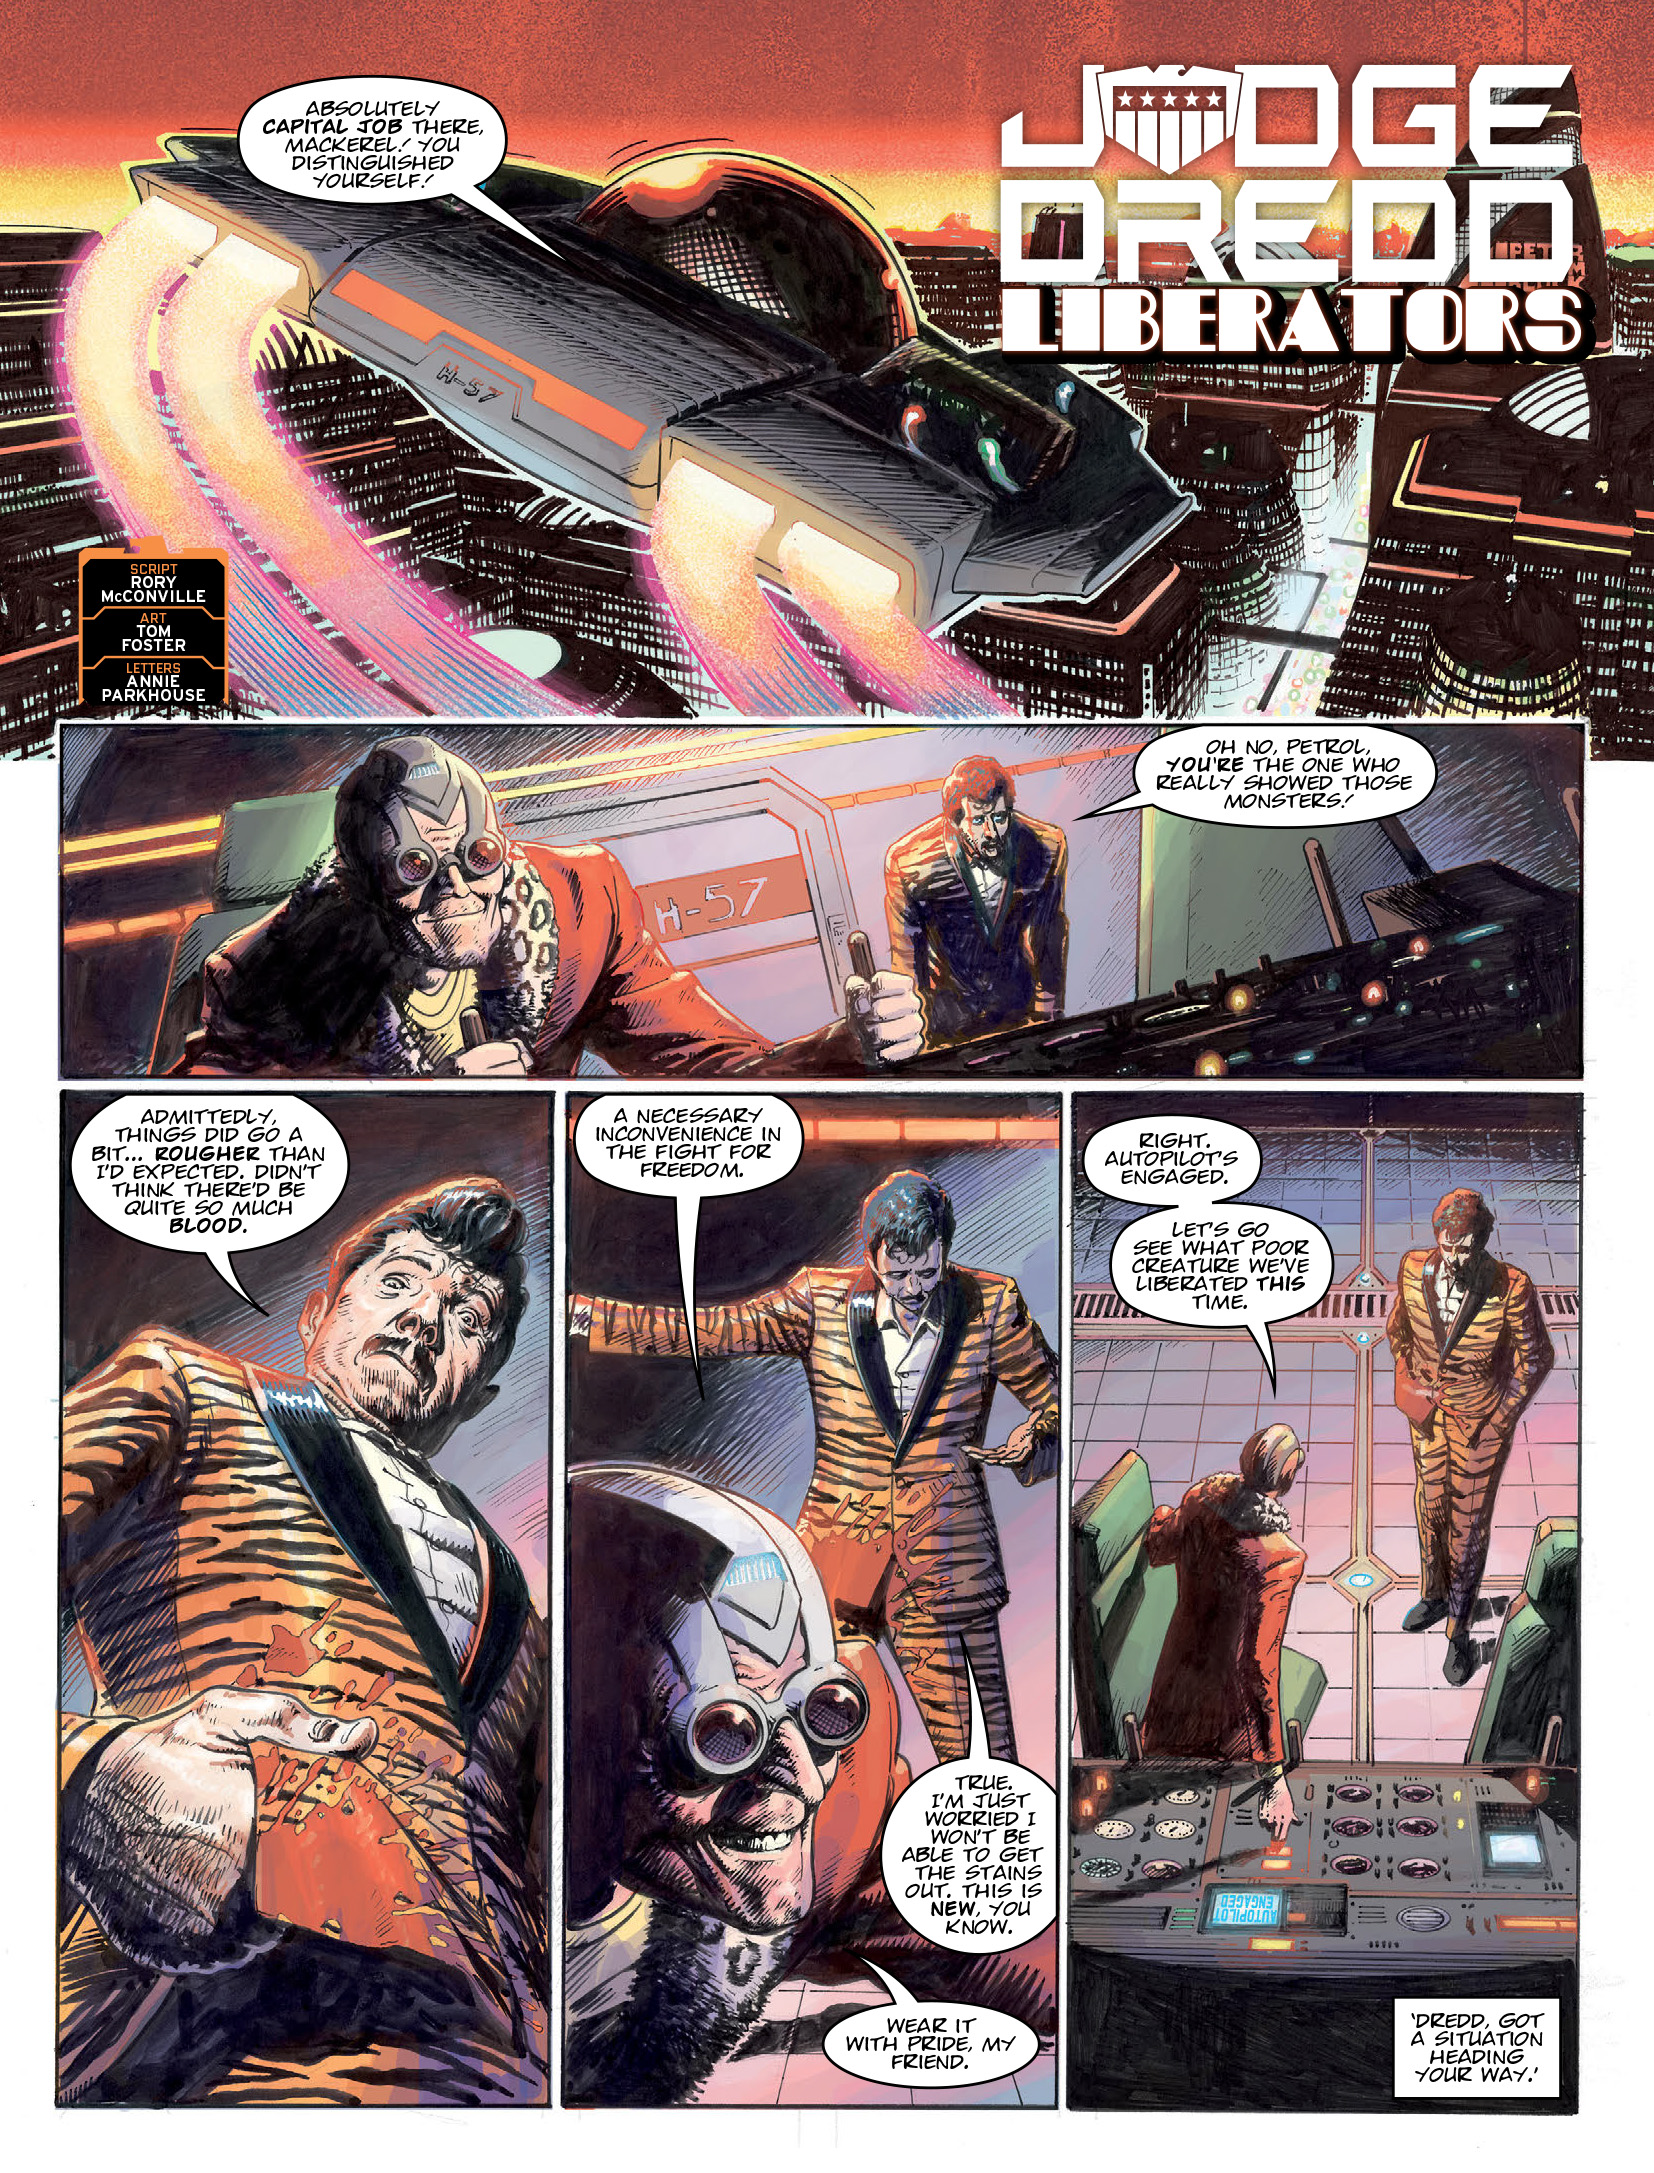 2000 AD: Chapter 2140 - Page 3